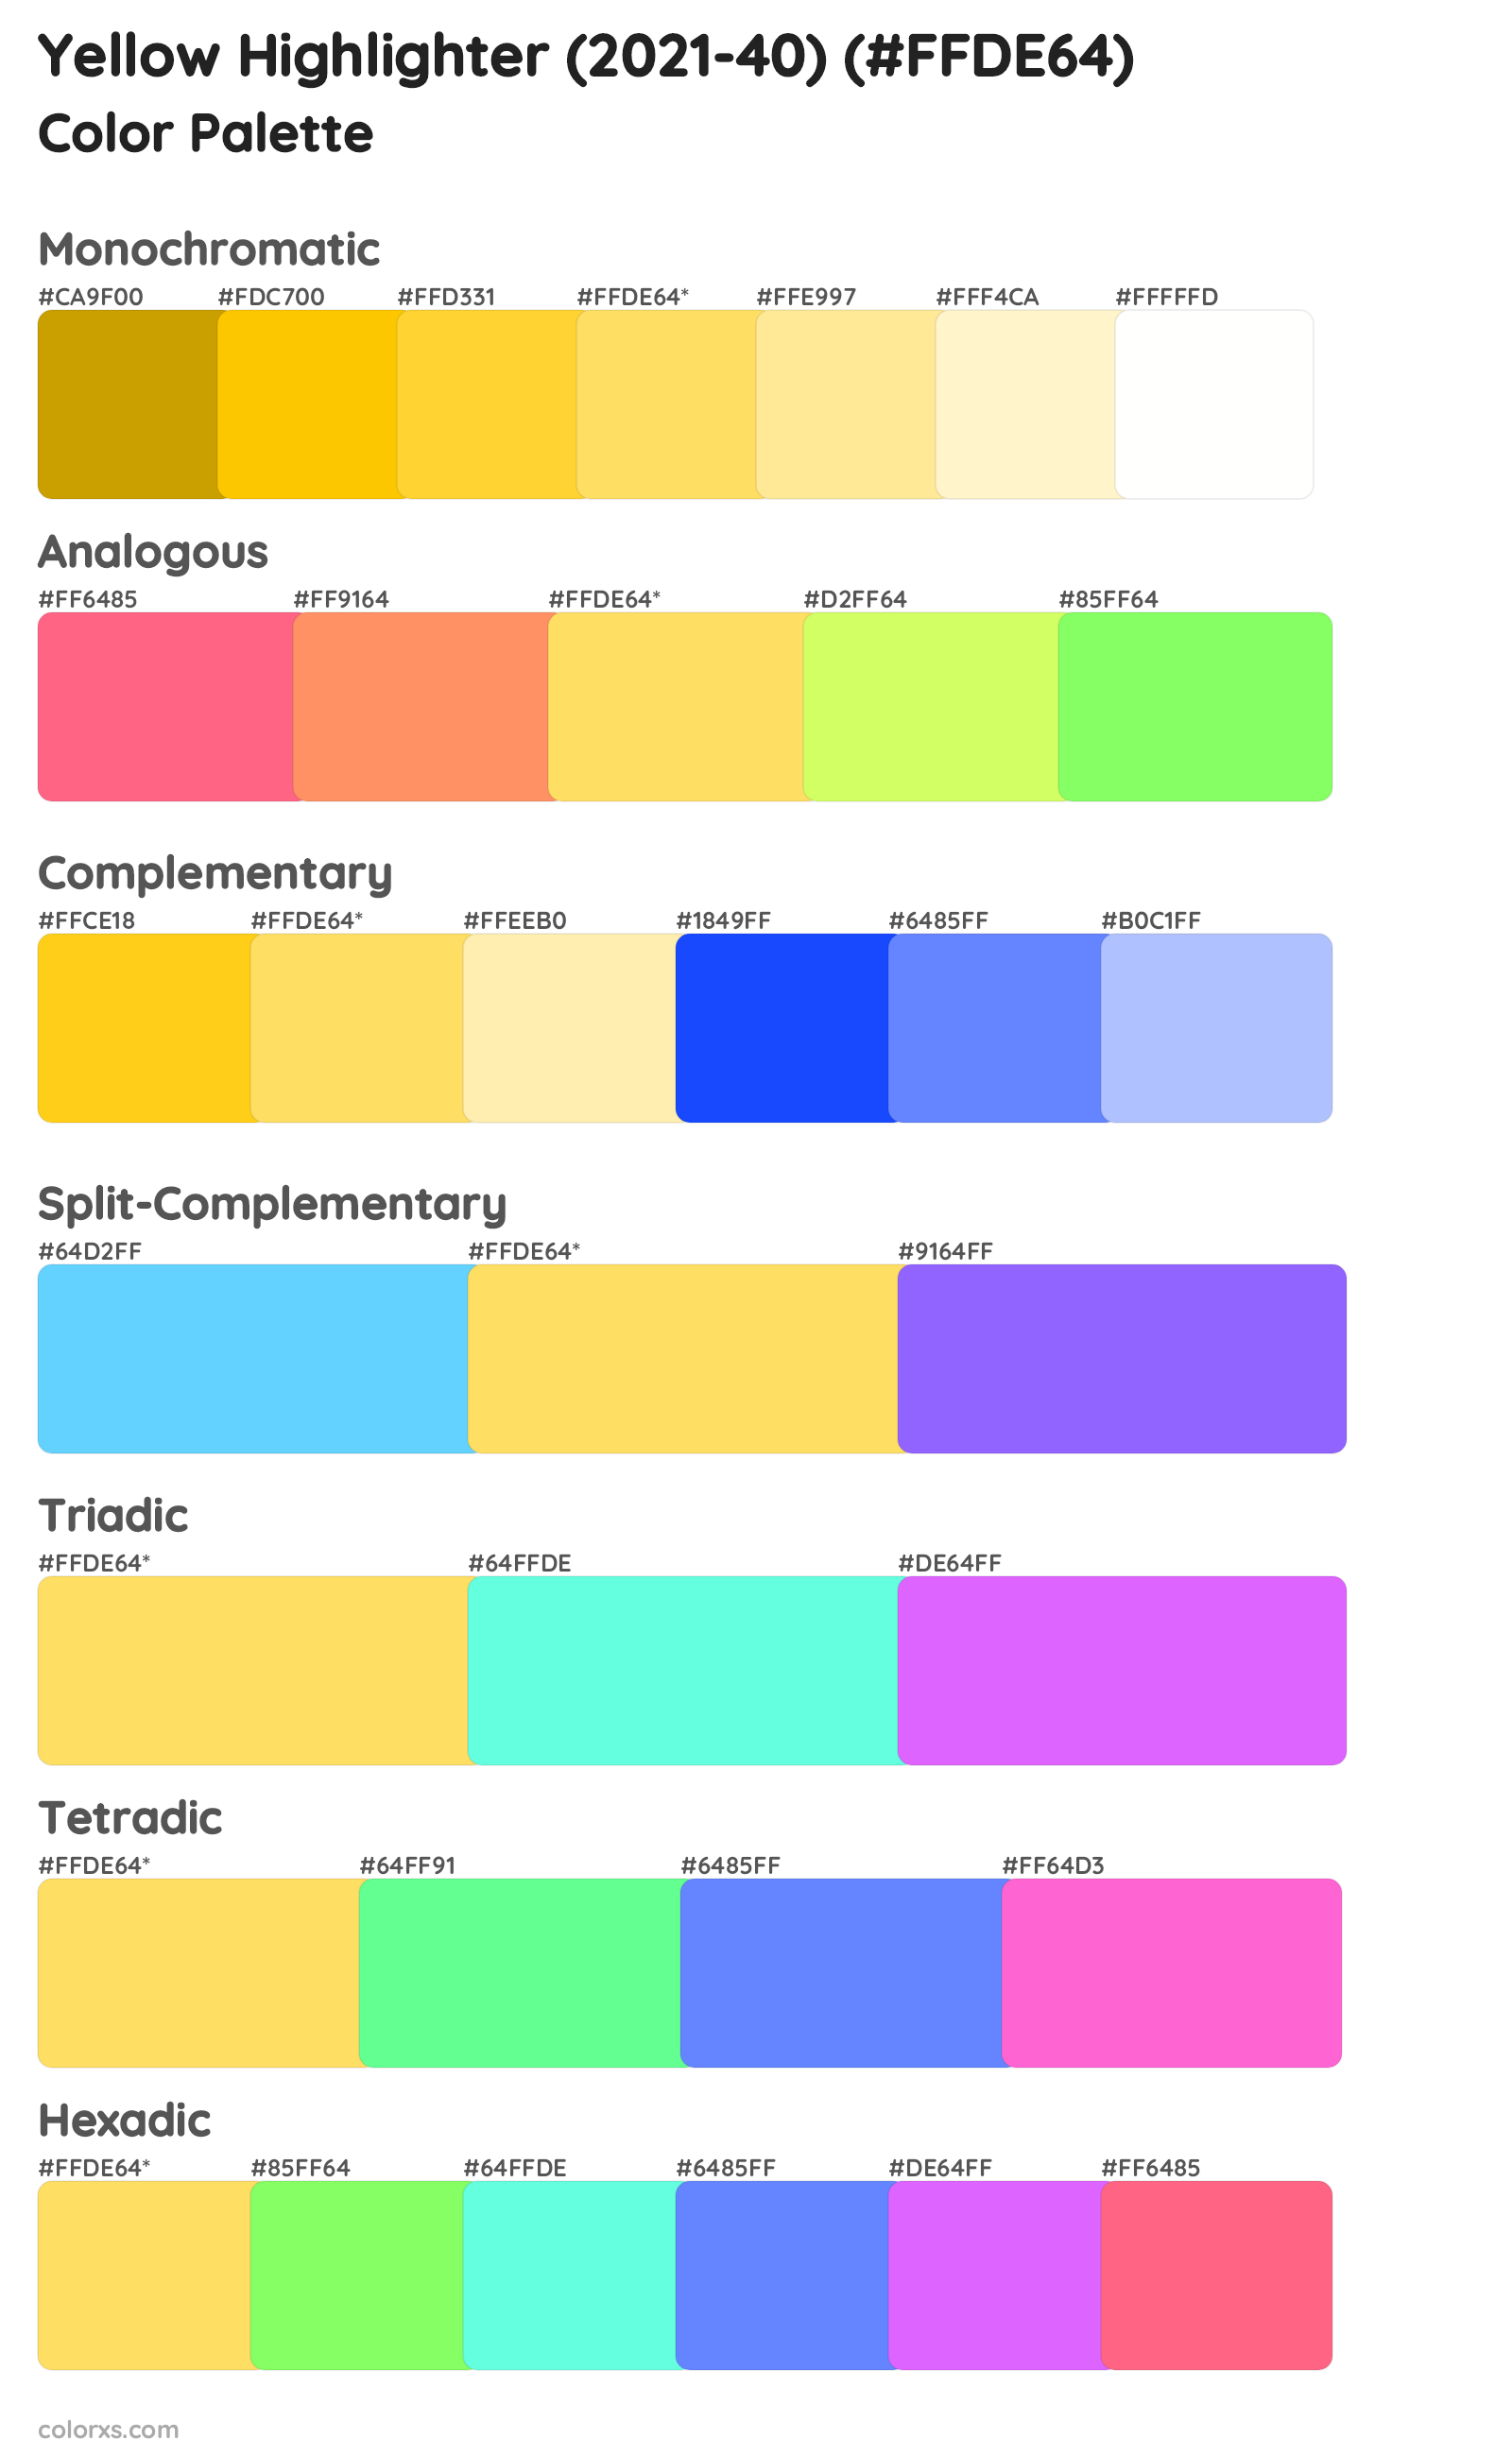 Yellow Highlighter (2021-40) Color Scheme Palettes